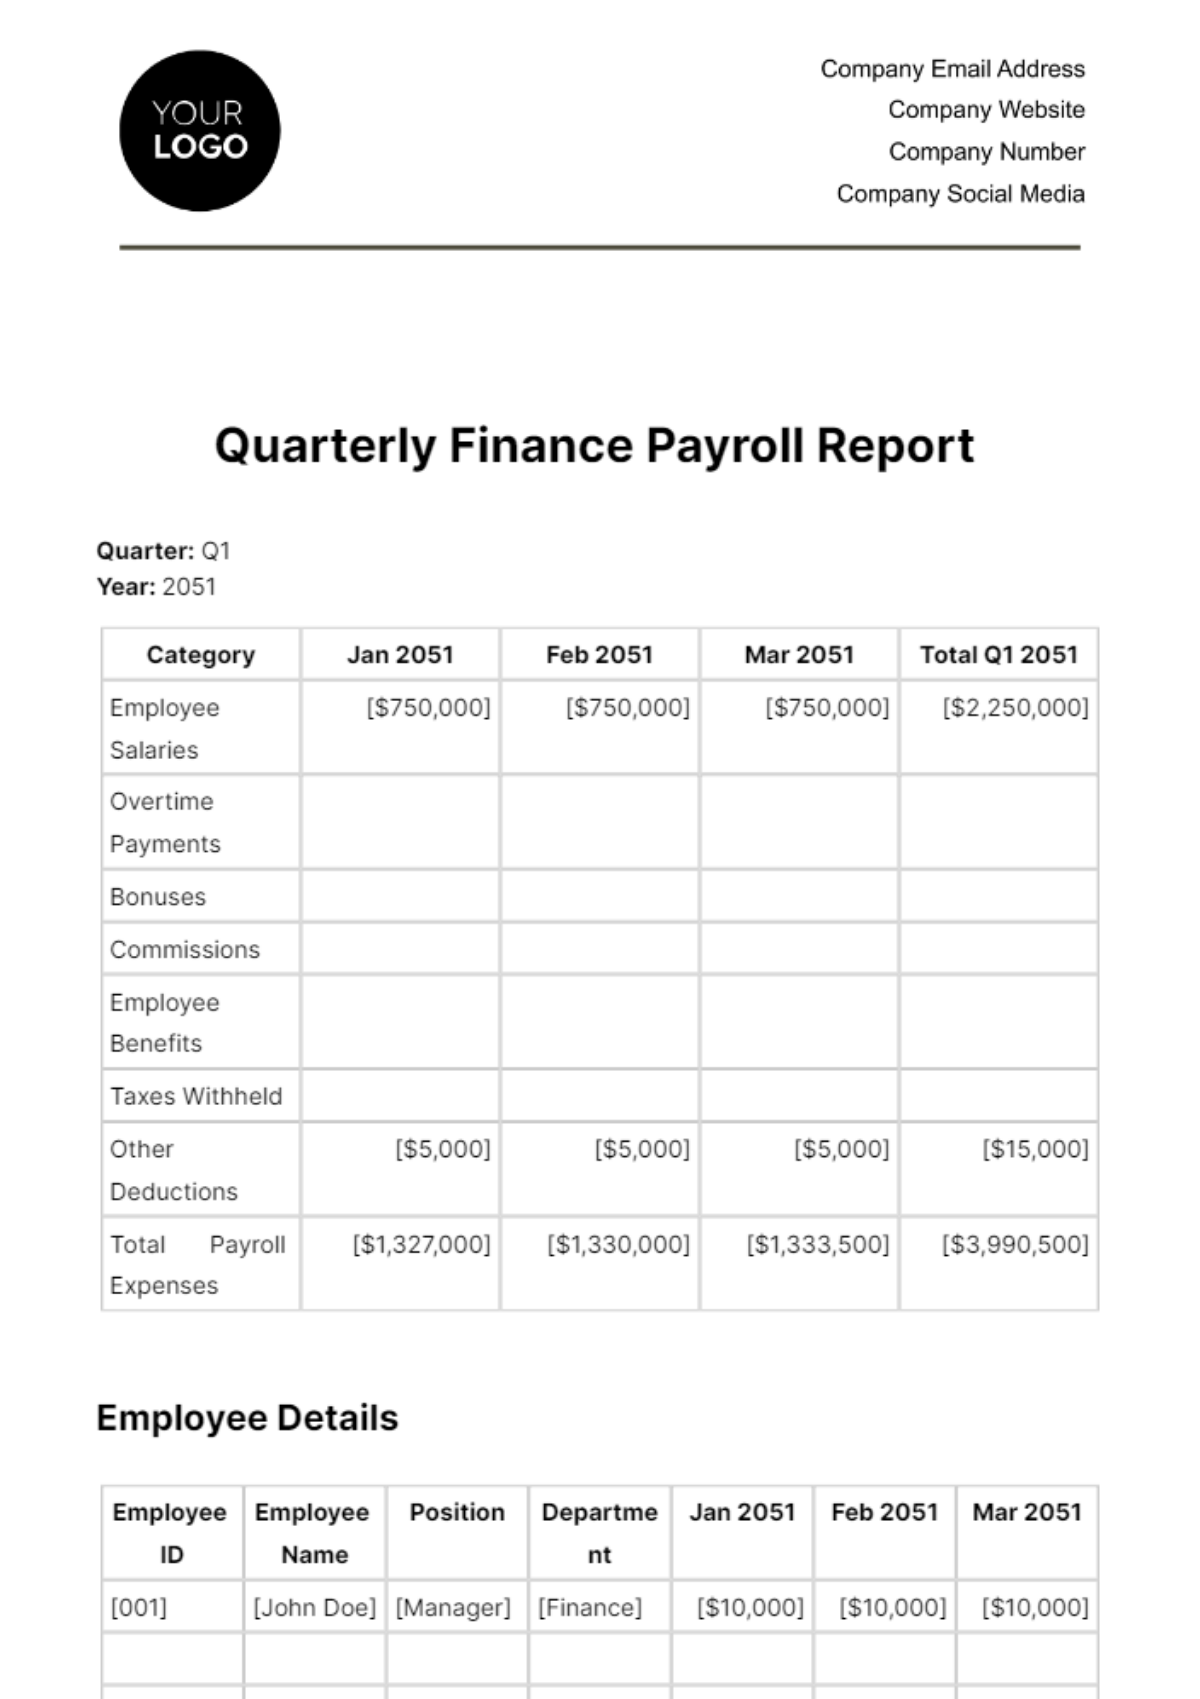 Free Quarterly Finance Payroll Report Template